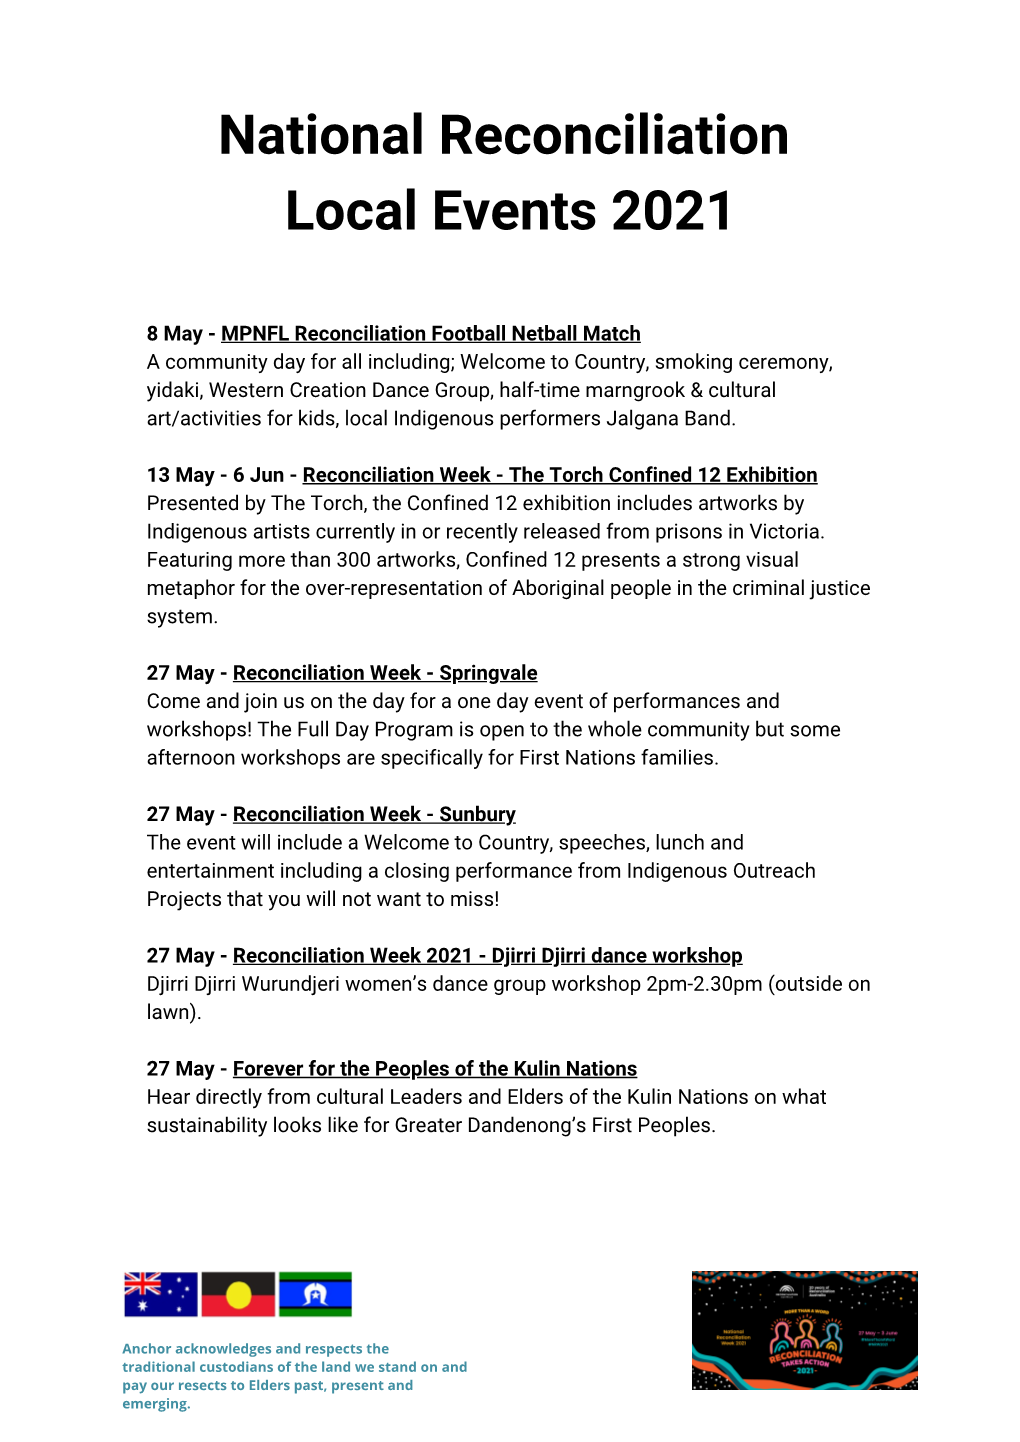 National Reconciliation Local Events 2021